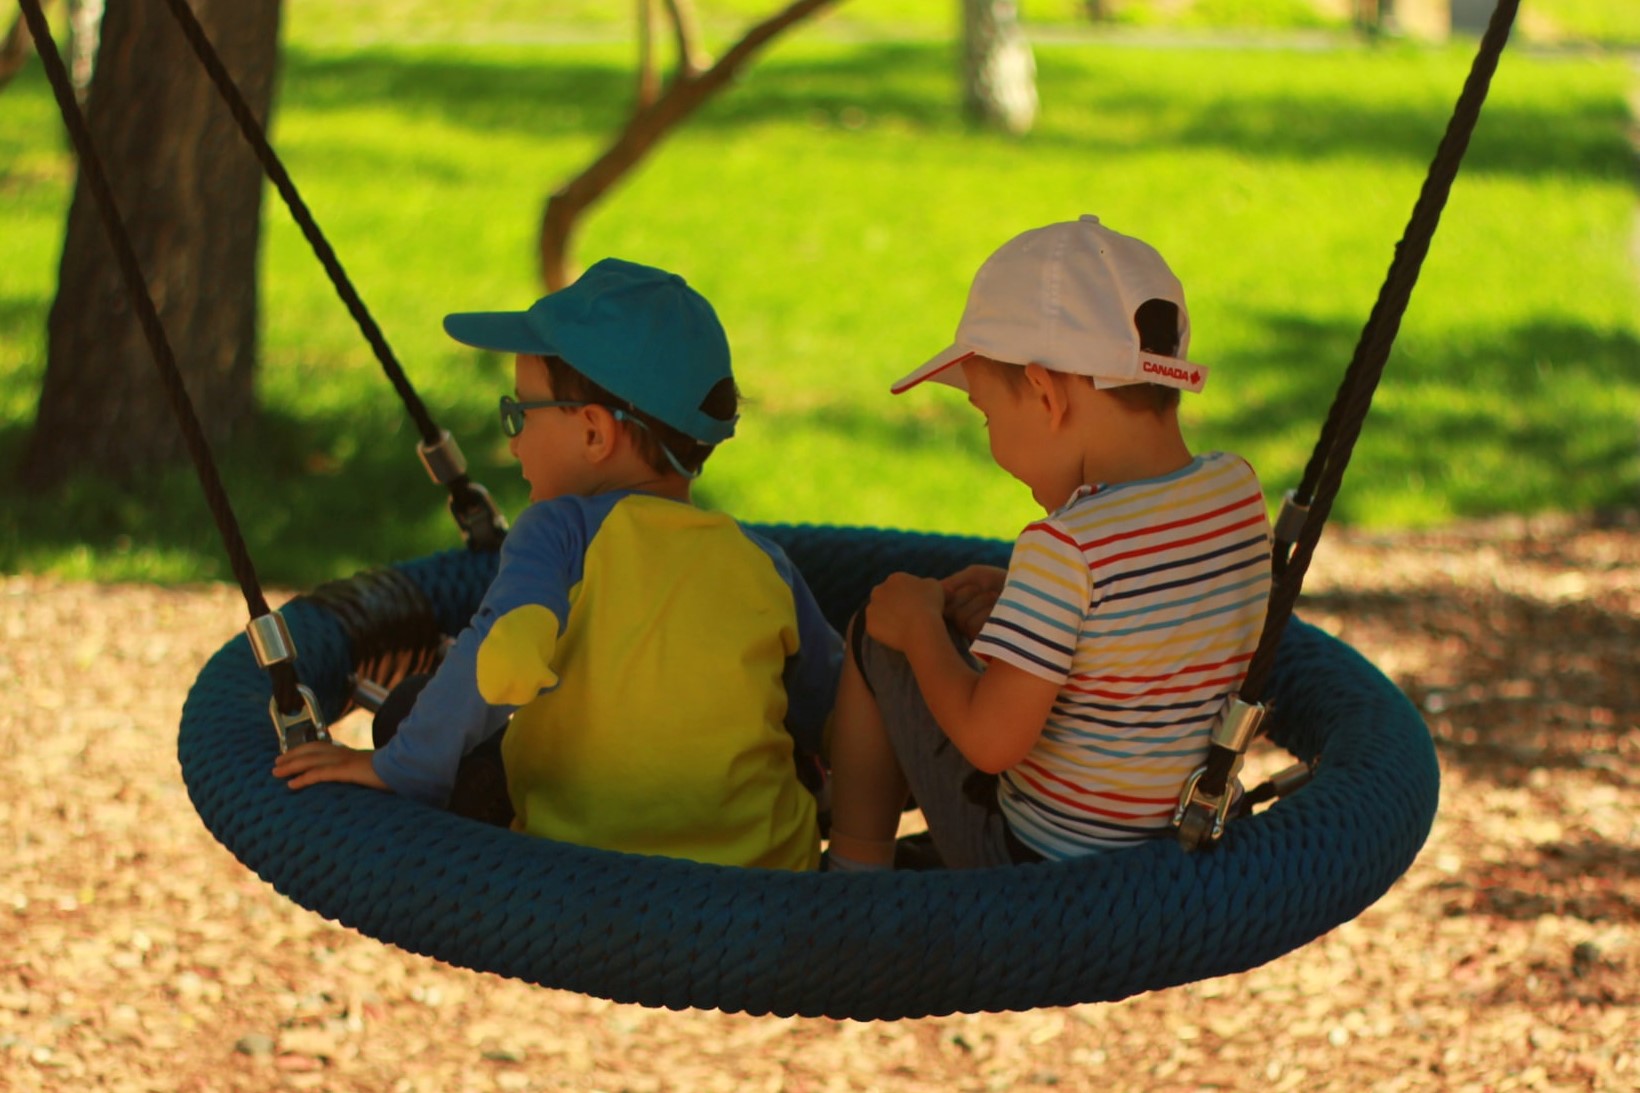 Children playing on a basket swing at park